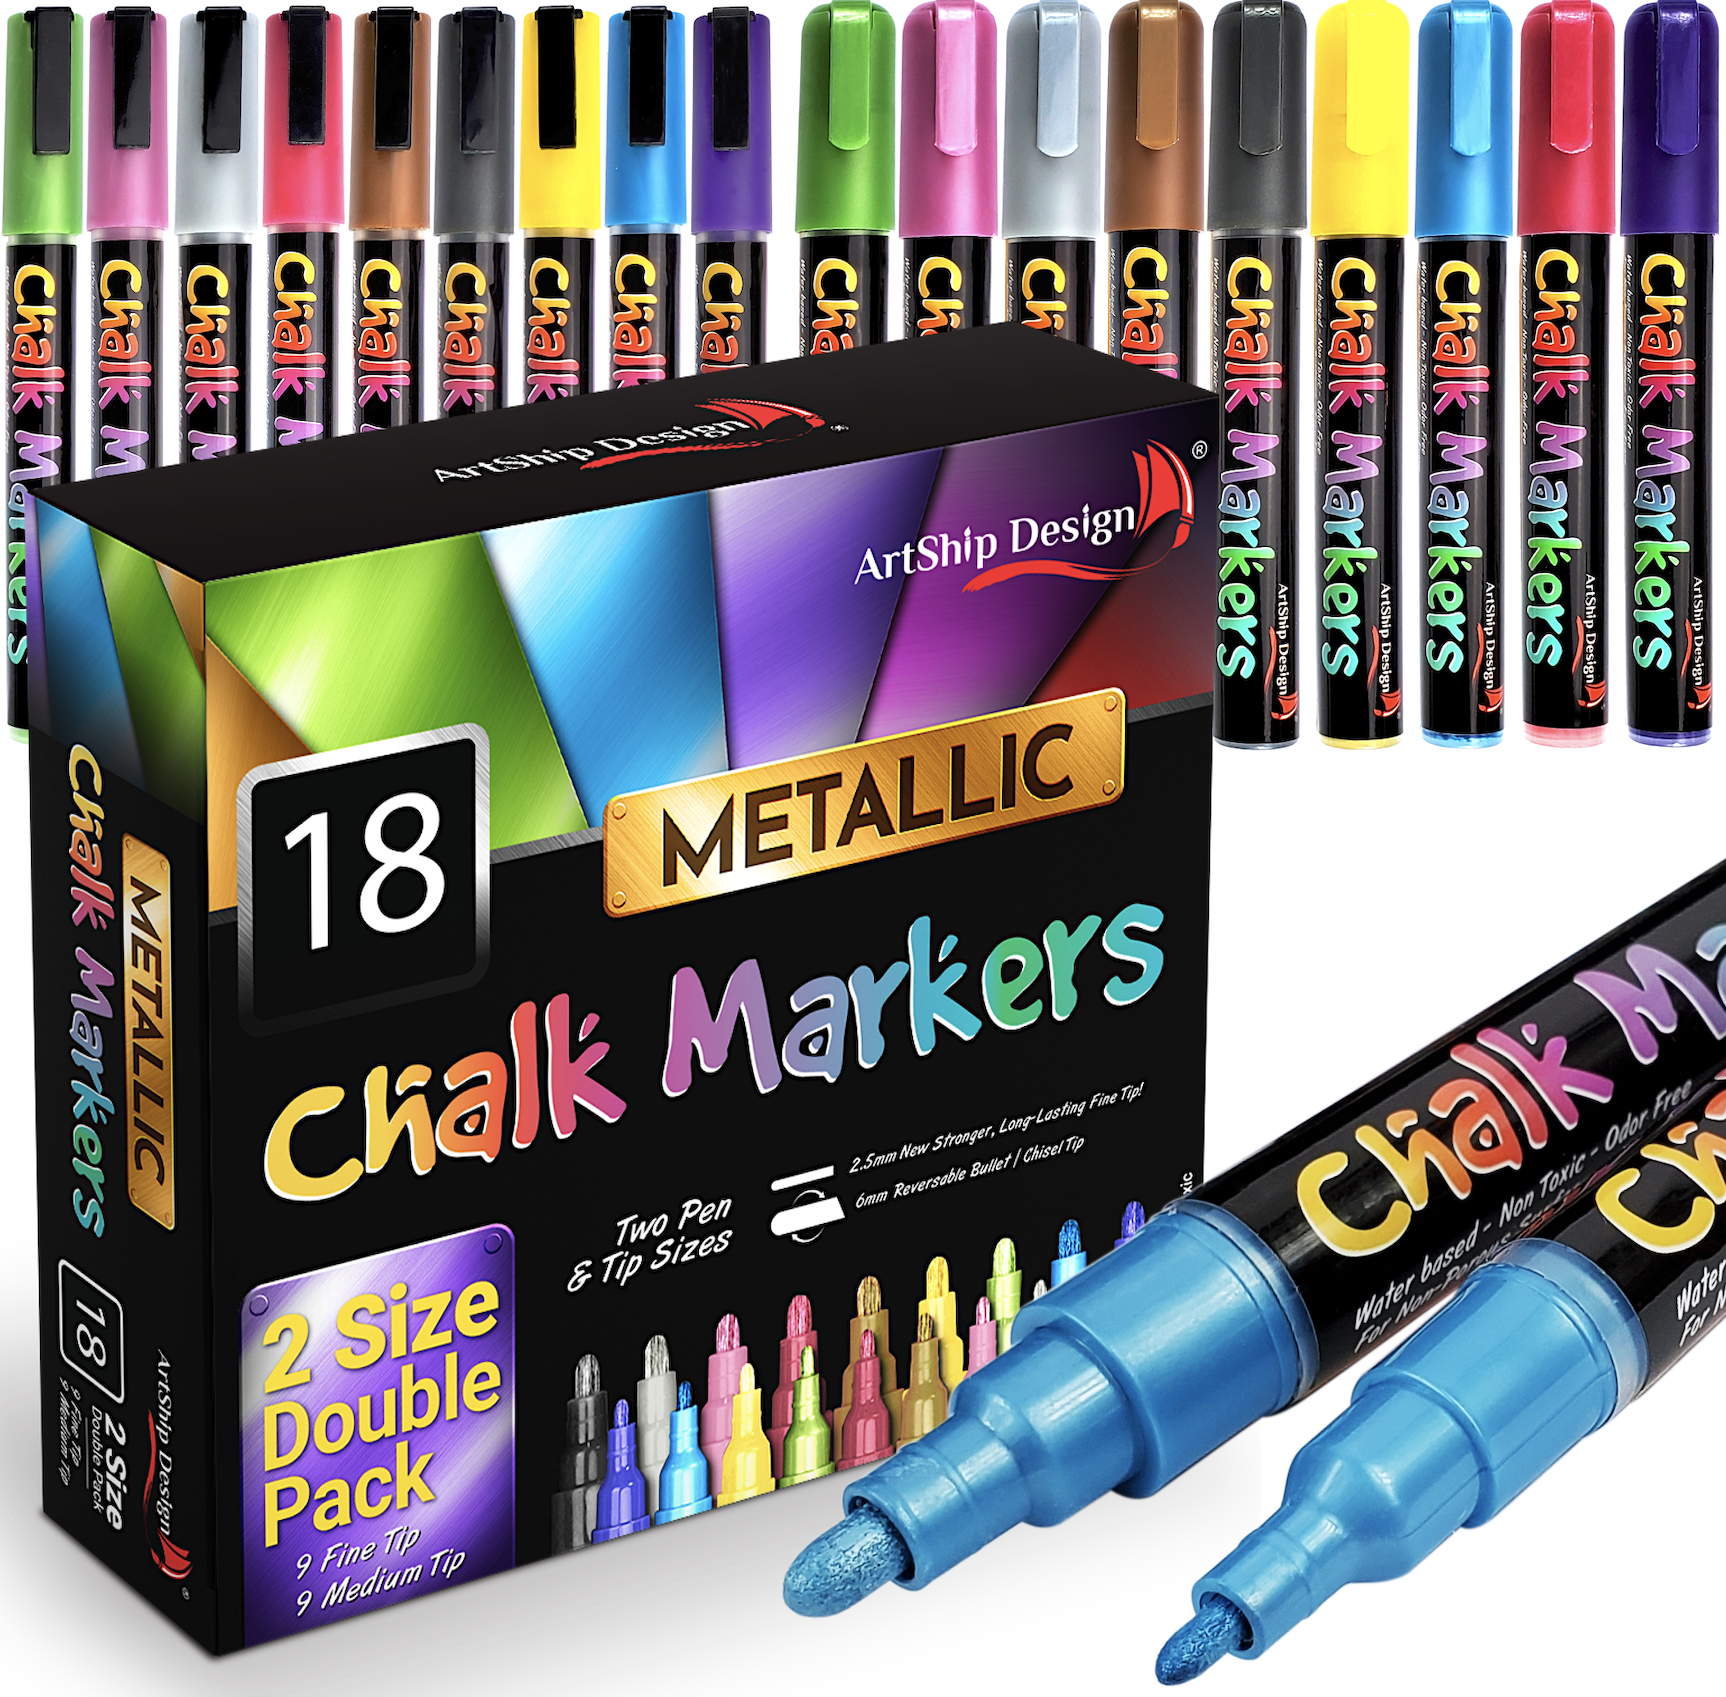  Dri Mark Liquid Chalk Markers 8 Neon + 2 Free Gold & Silver  Metallic Chalk Markers 10 Pack, Made in USA, Non-Toxic, Odor Free, No  Shaking, Pumping, Leaks or Spills